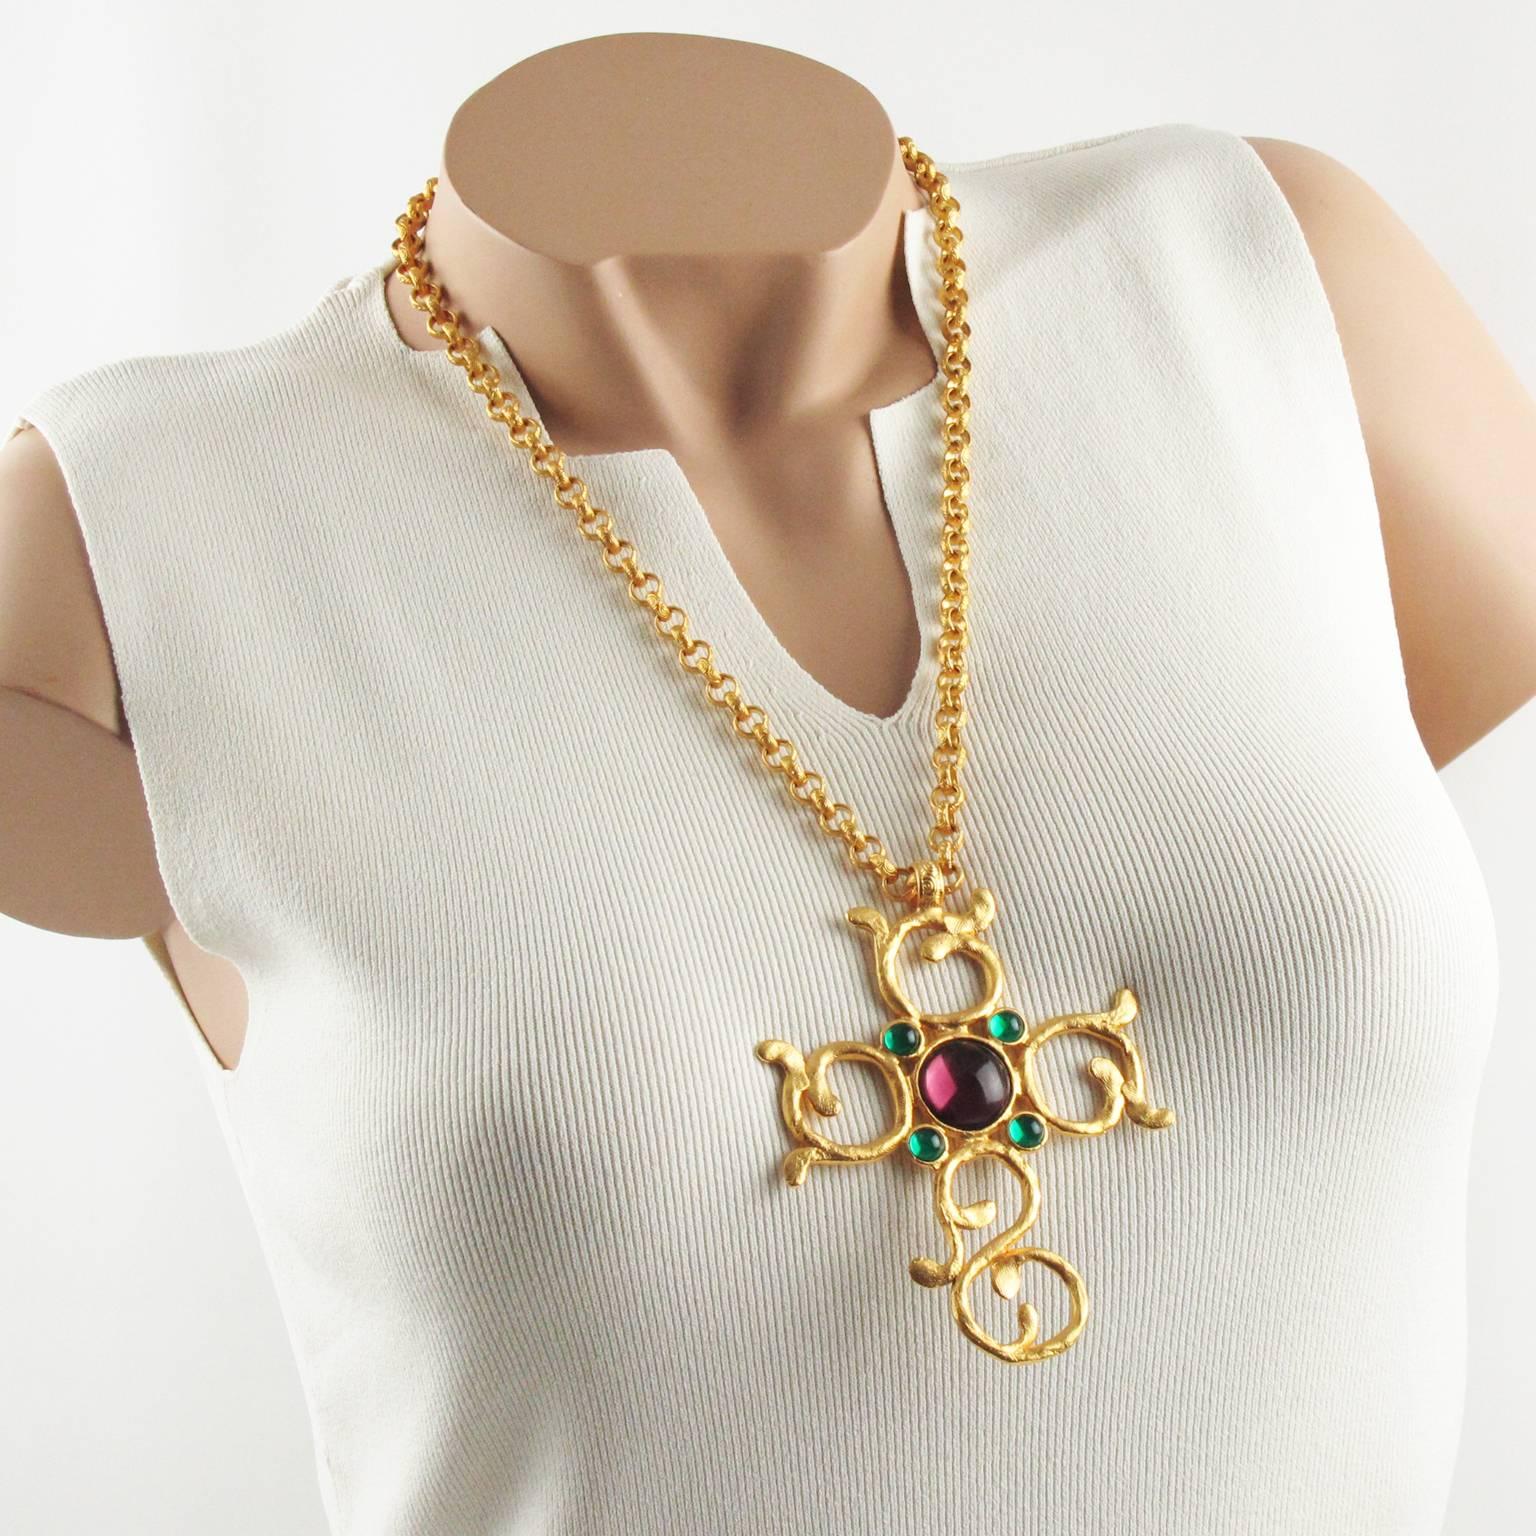 Elegant Carol Dauplaise openwork gilt metal cross pendant necklace. Featuring a huge hand-made feel carved and see thru modernist cross pendant, ornate with poured glass cabochon in purple plum and emerald green color. Original long and heavy worked